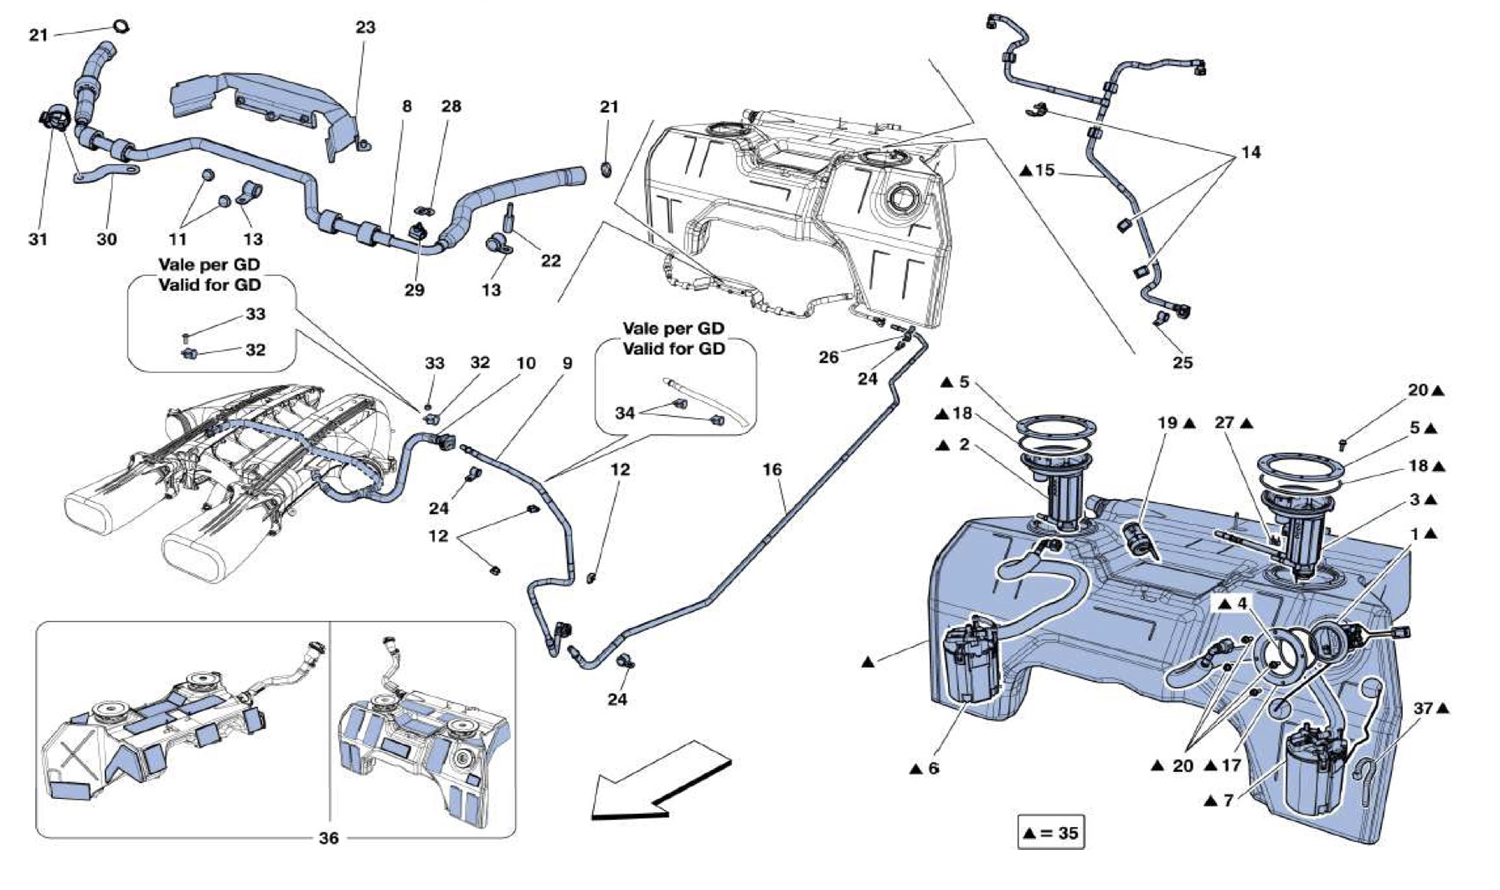 Schematic: Fuel Tank, Fuel System Pumps And Pipes